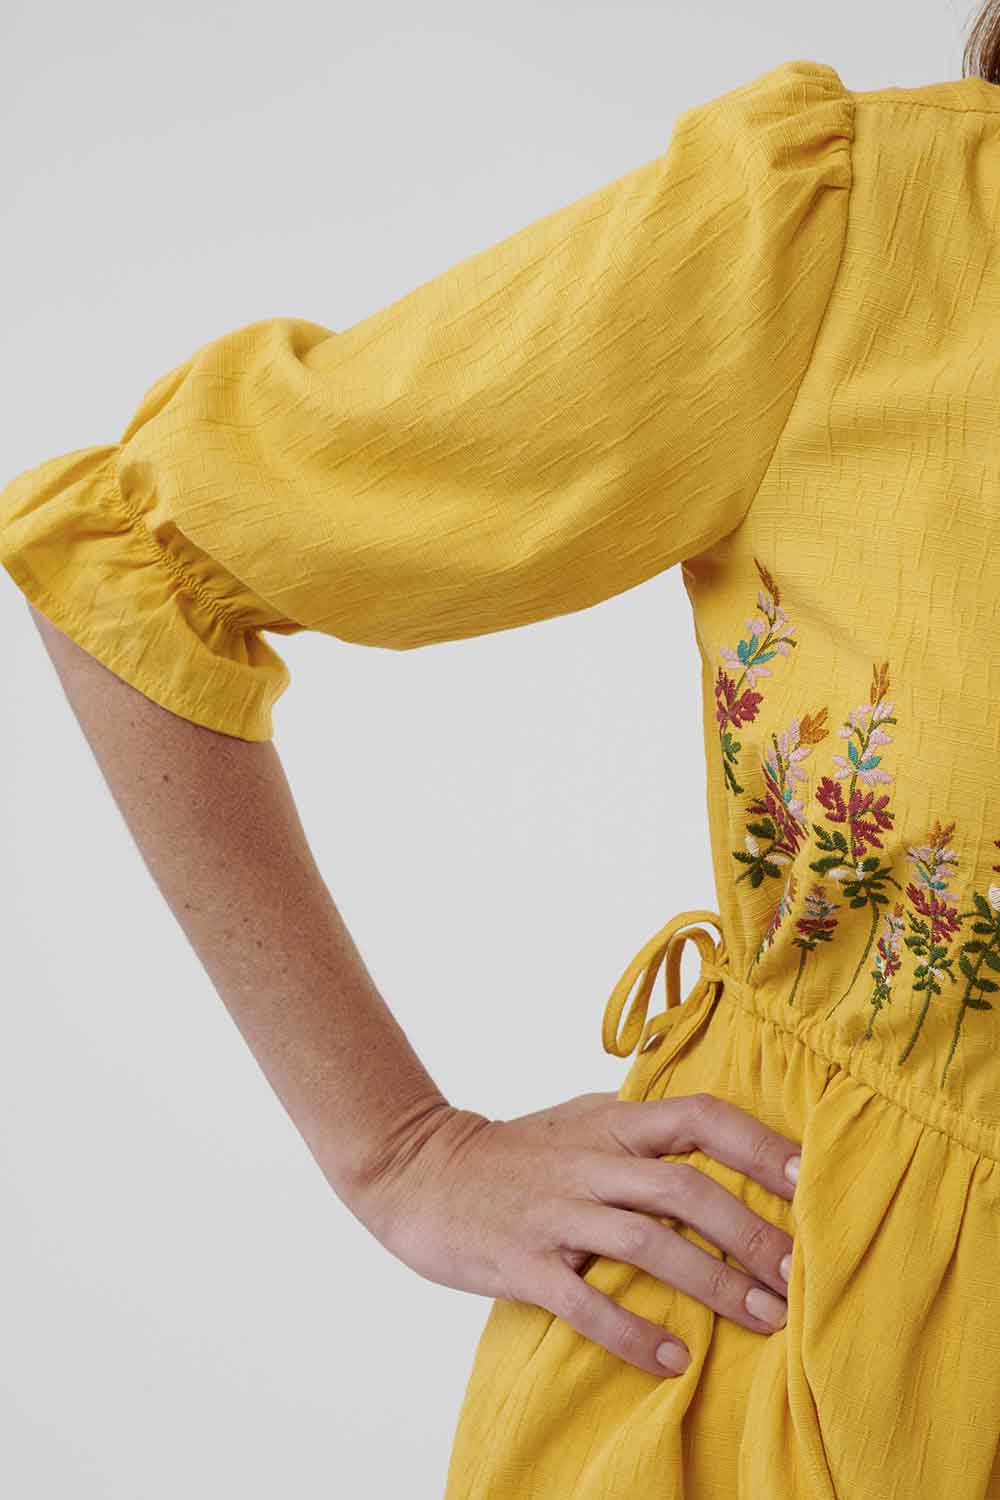 Dancing in a Dream Embroidered Yellow Dress